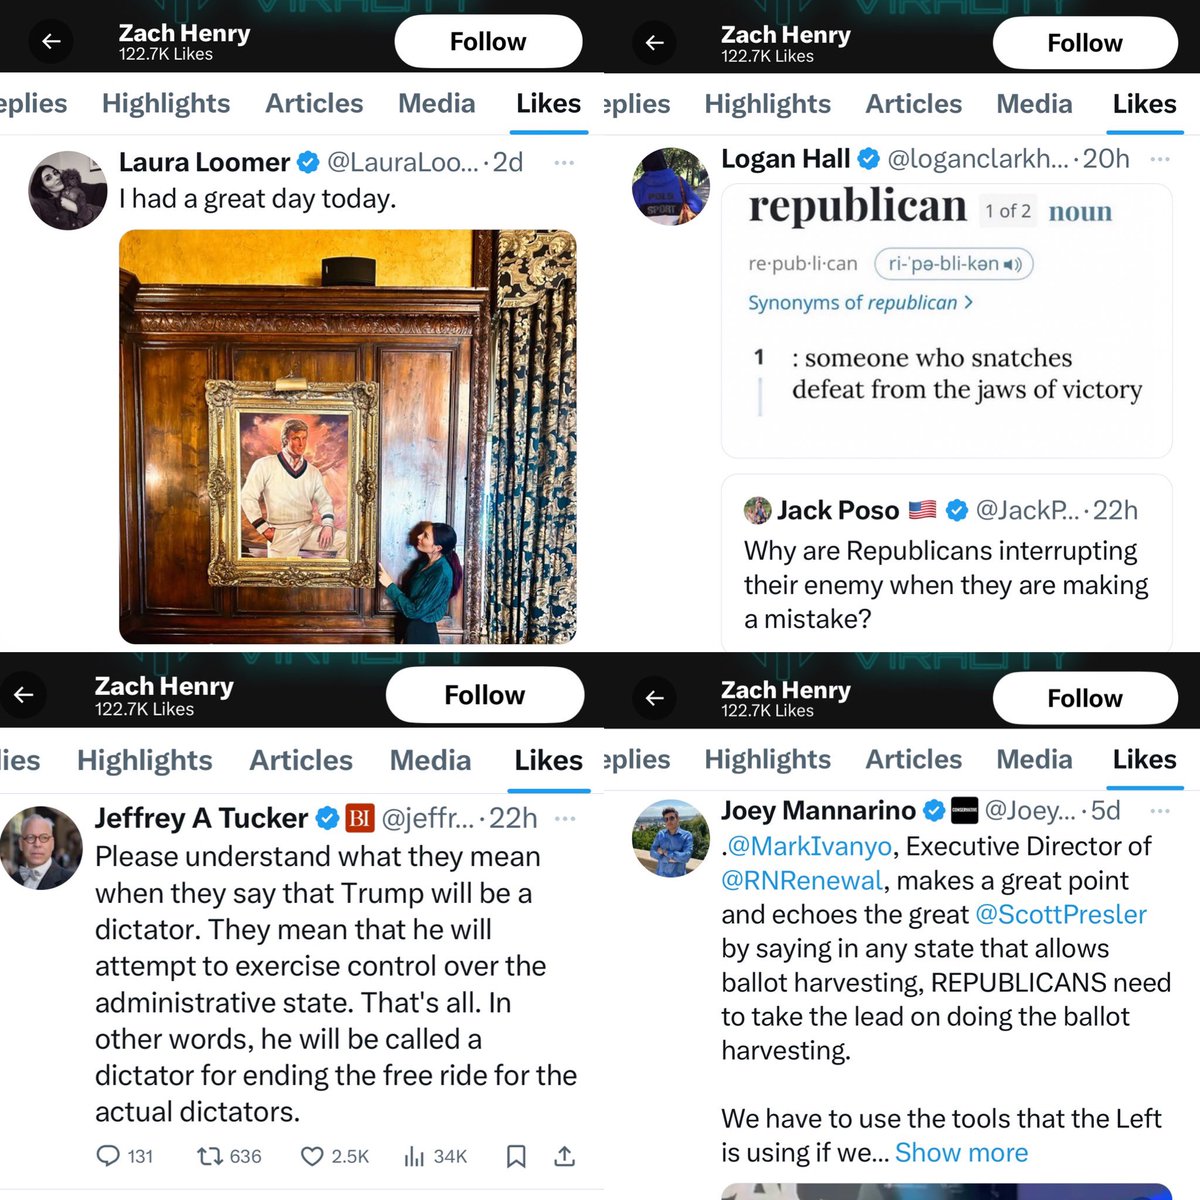 124. Check out some of Zach Henry’s “Likes” just in the past few days. He was just hired by the RFK Jr. campaign for “influencer engagement.” Def not a #Spoiler4Trump campaign. 🙄